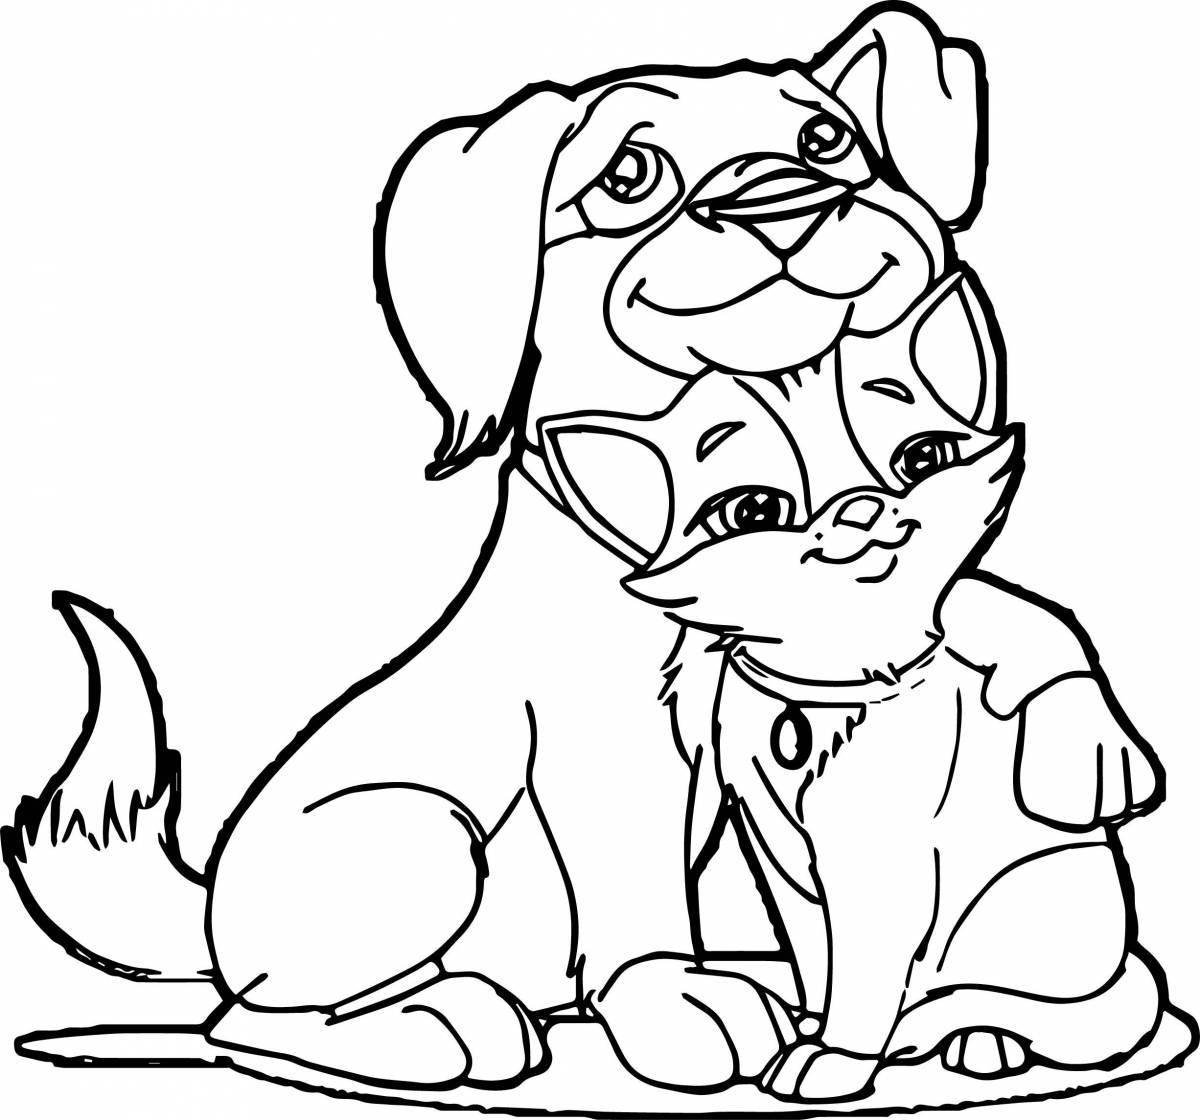 Coloring page blissful cat and dog together